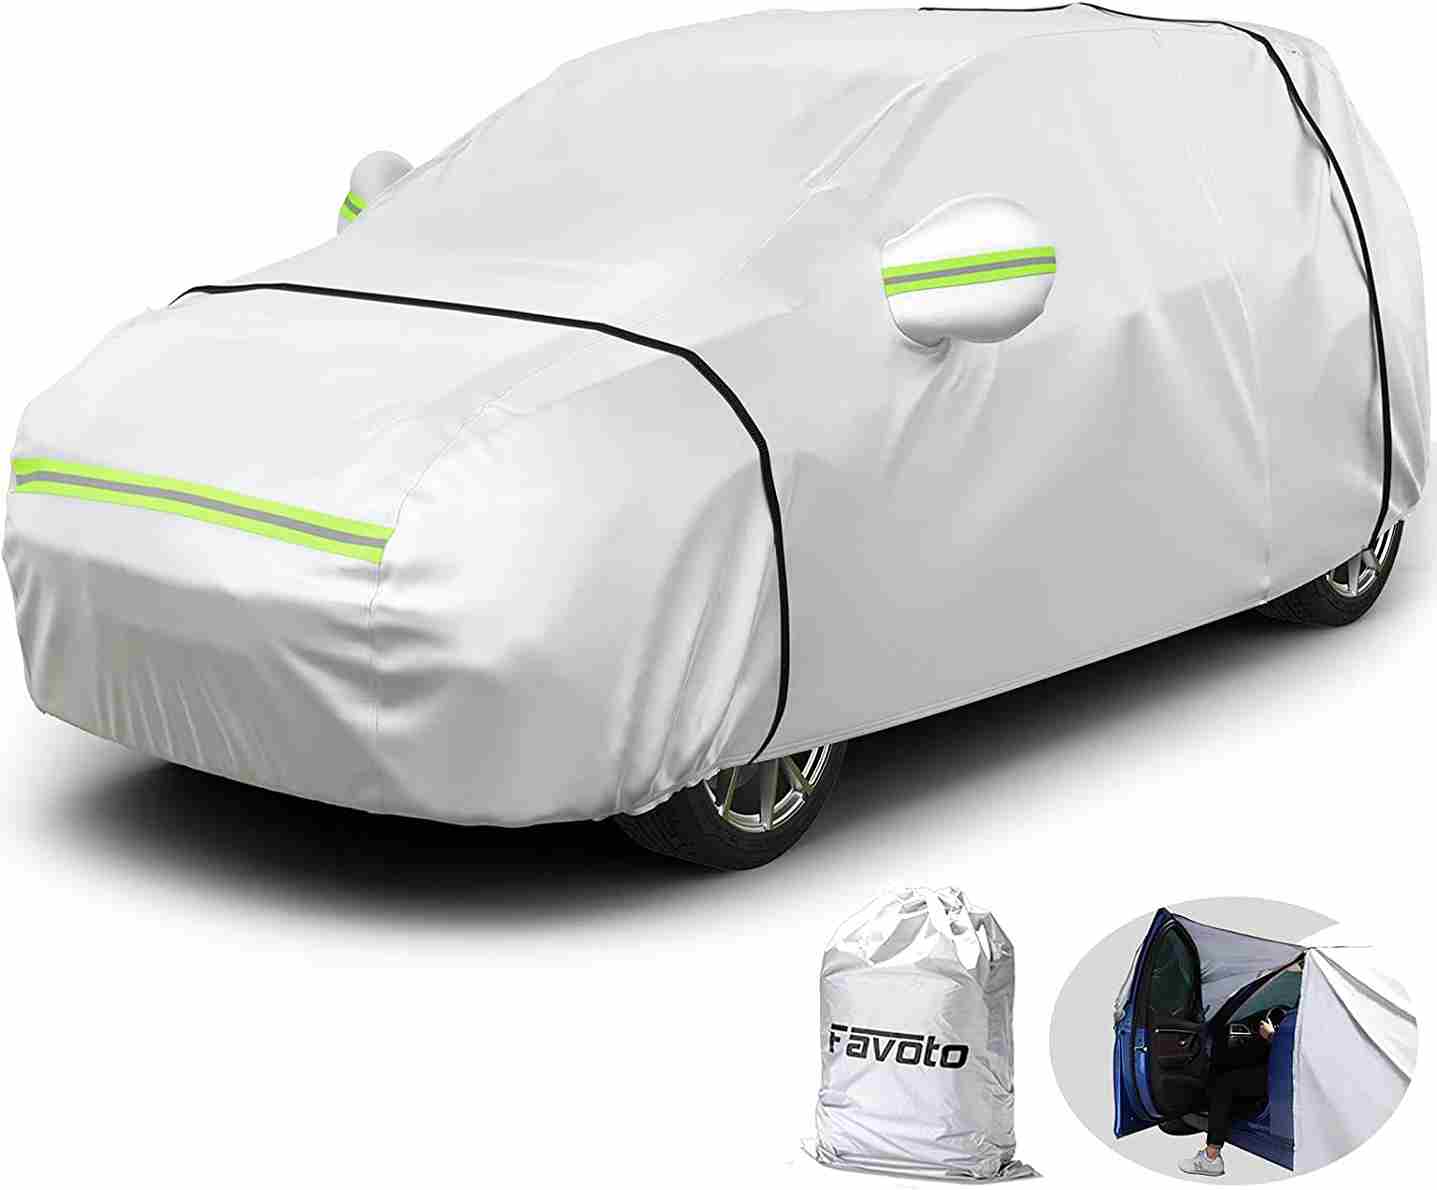 8 Best Car Cover For Honda CRV in USA 2022 Best SUV Cover 2022